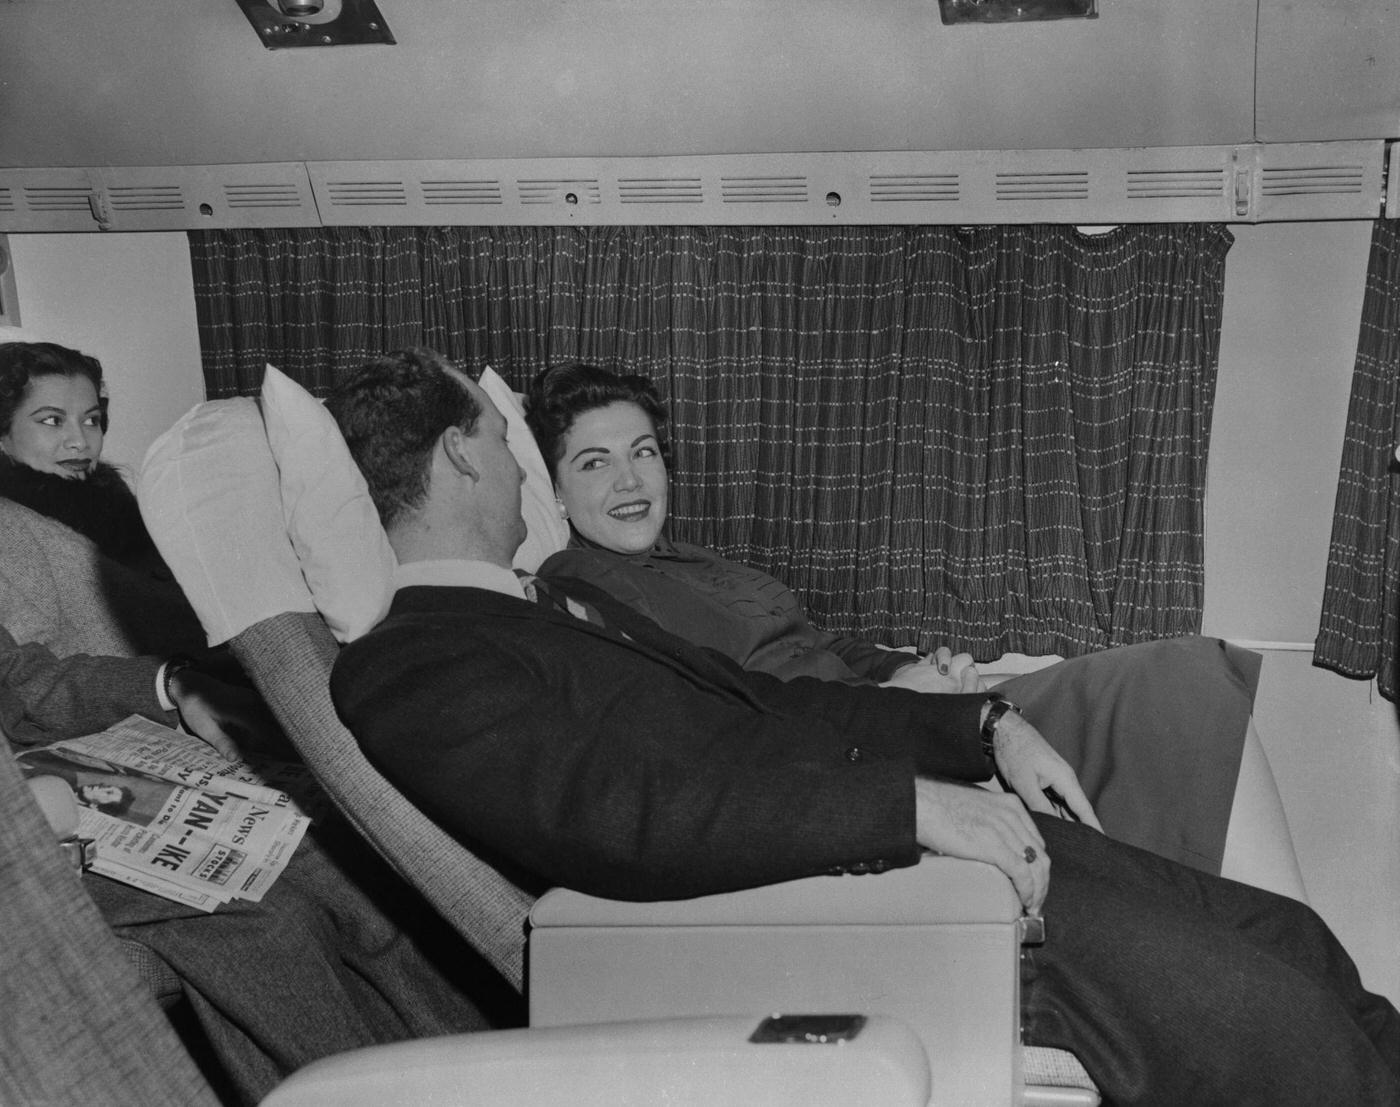 Passengers prepare to take a nap on a Transocean Air lines Boeing 377 Stratocruiser in the mid-1950s. Transocean Air lines was a pioneer discount airline that flew between 1946 and 1962.